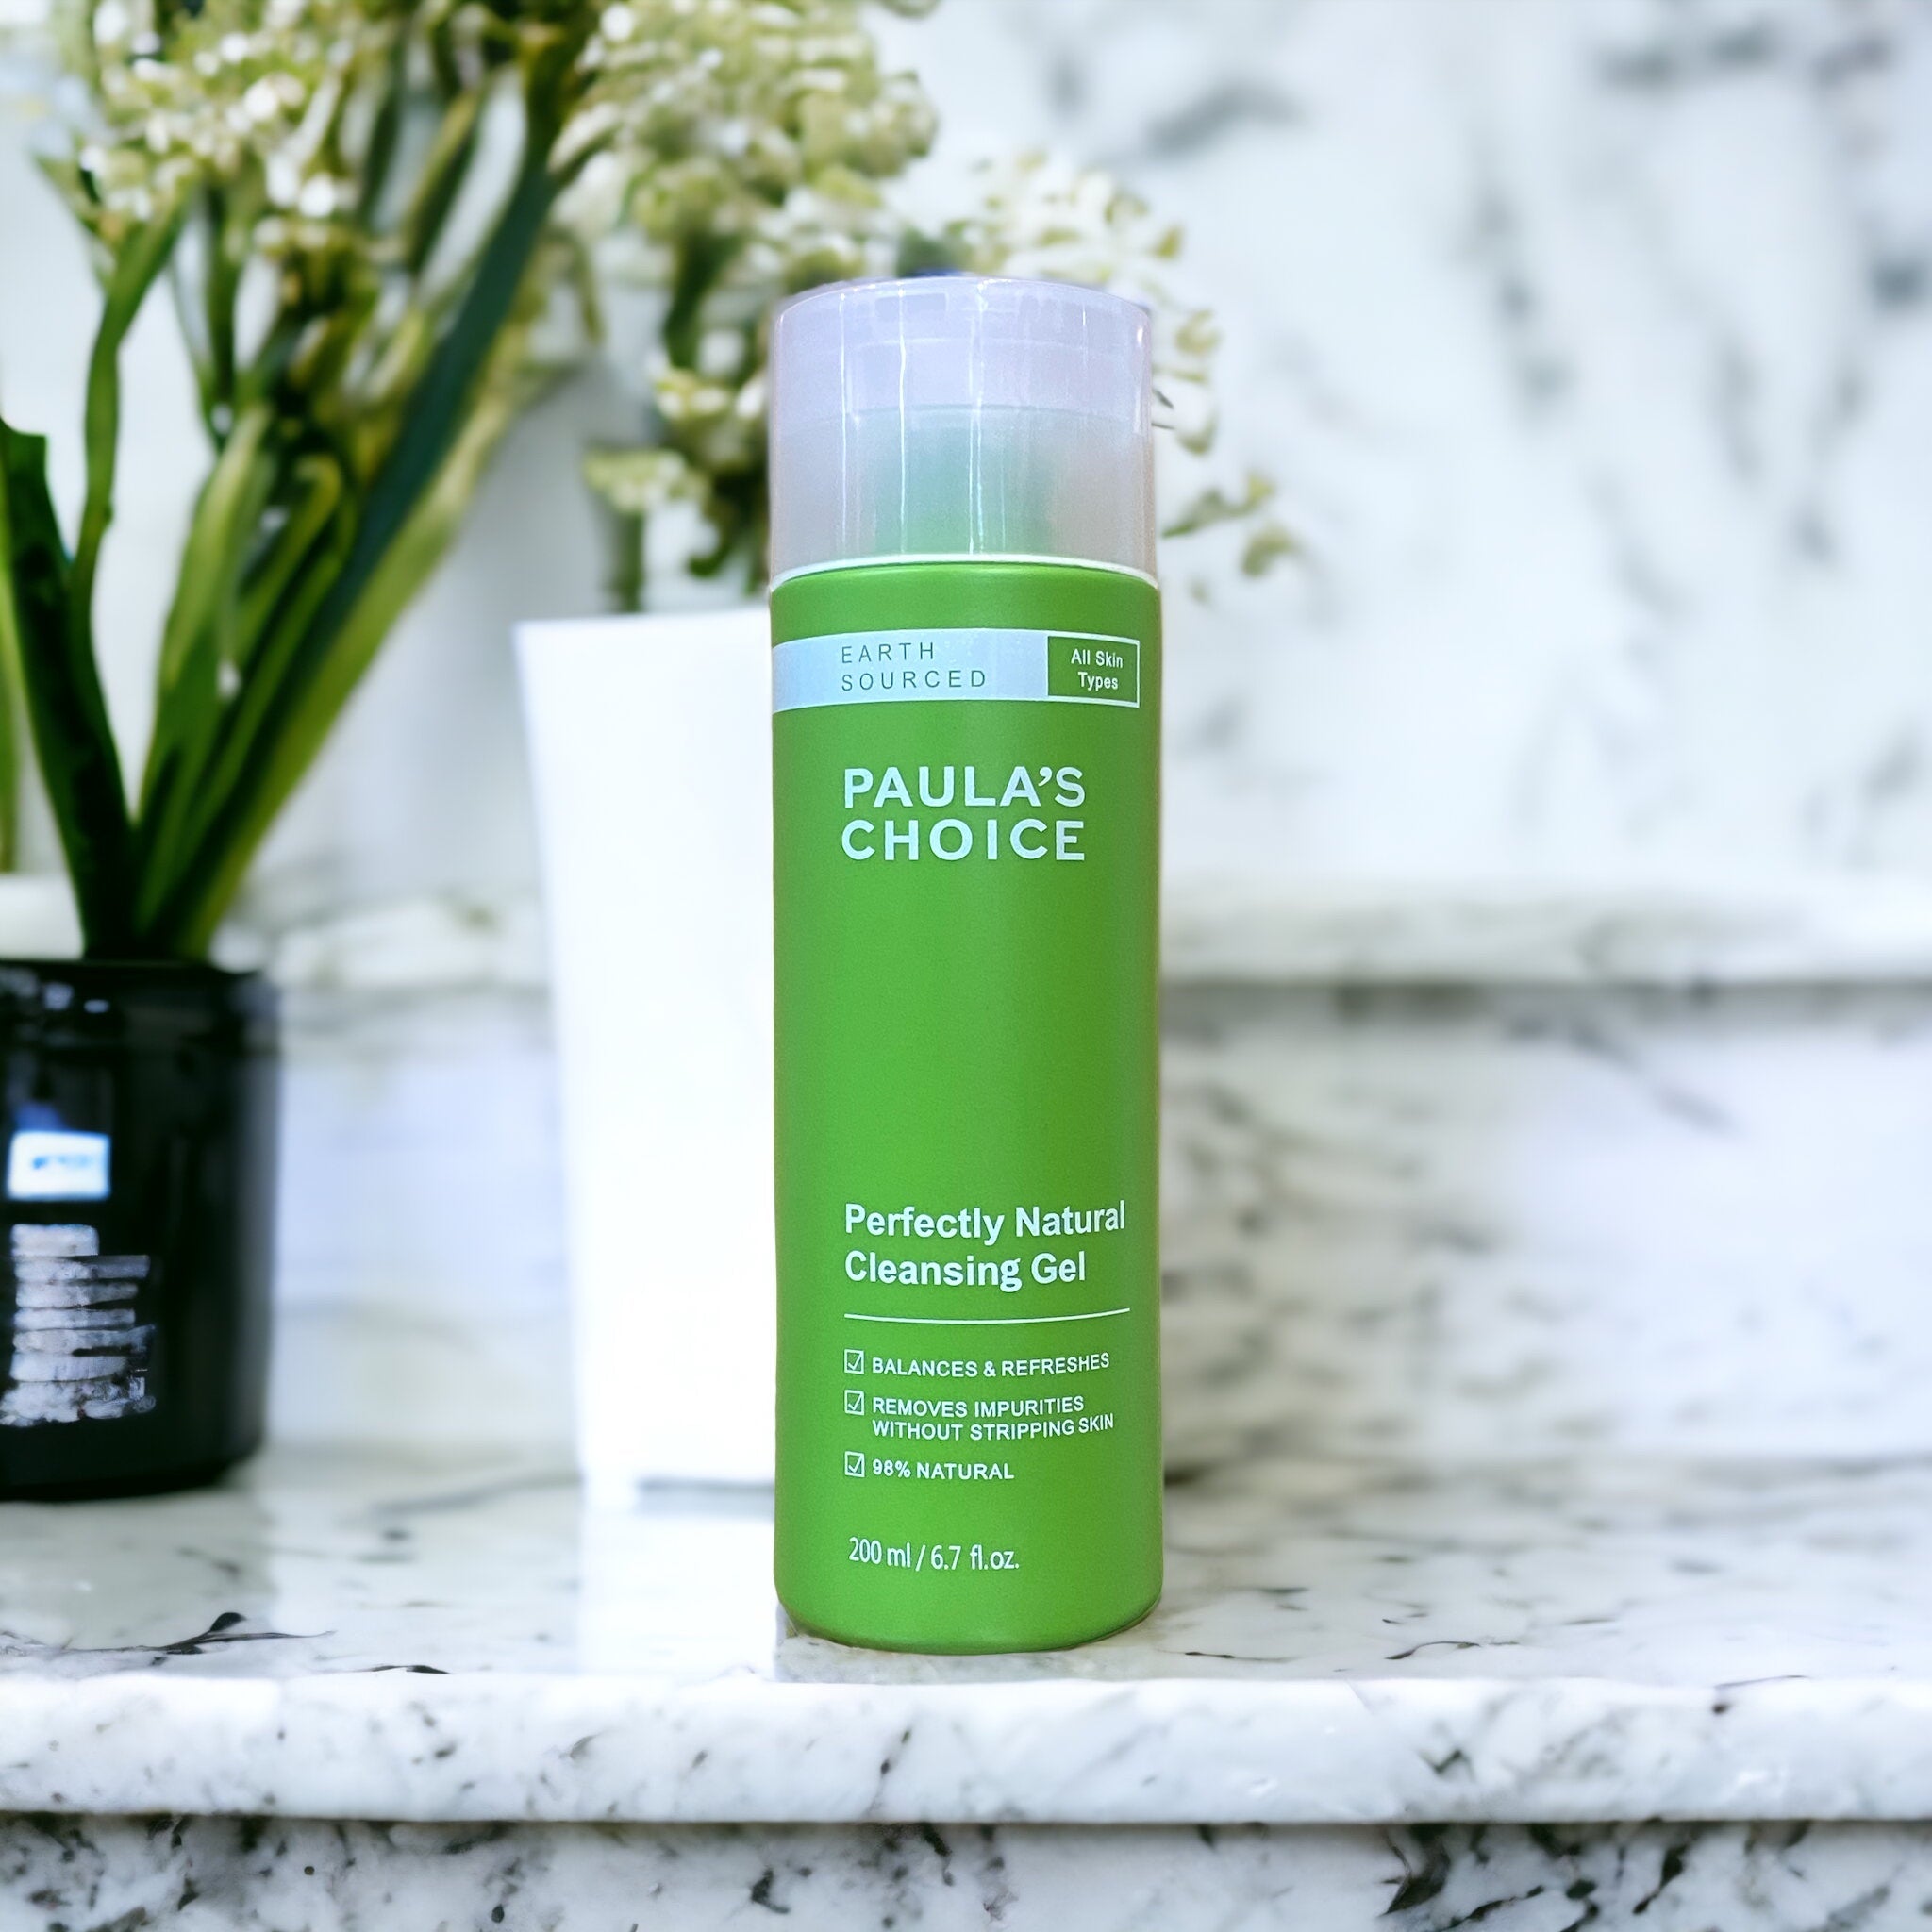 PAULA’S CHOICE PERFECTLY NATURAL CLEANSING GEL